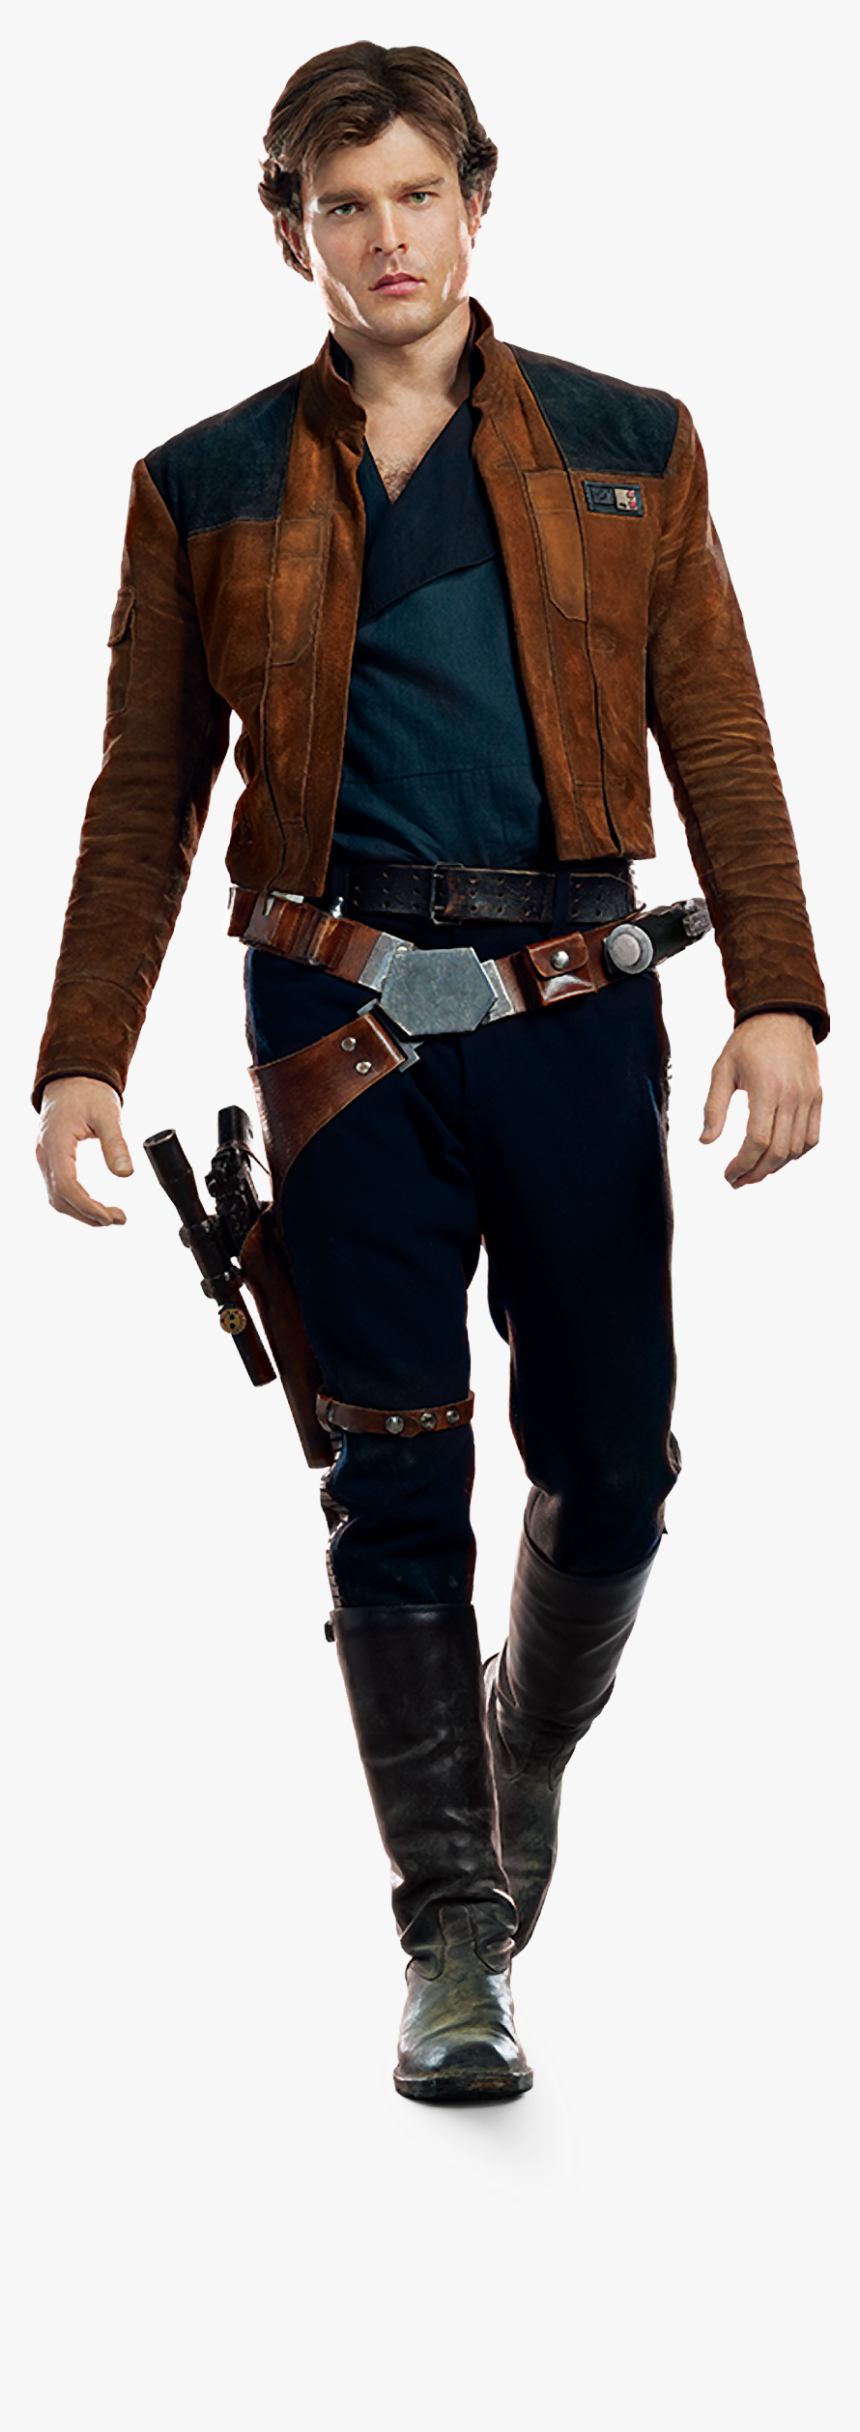 Harrison Ford Png, Transparent Png, Free Download